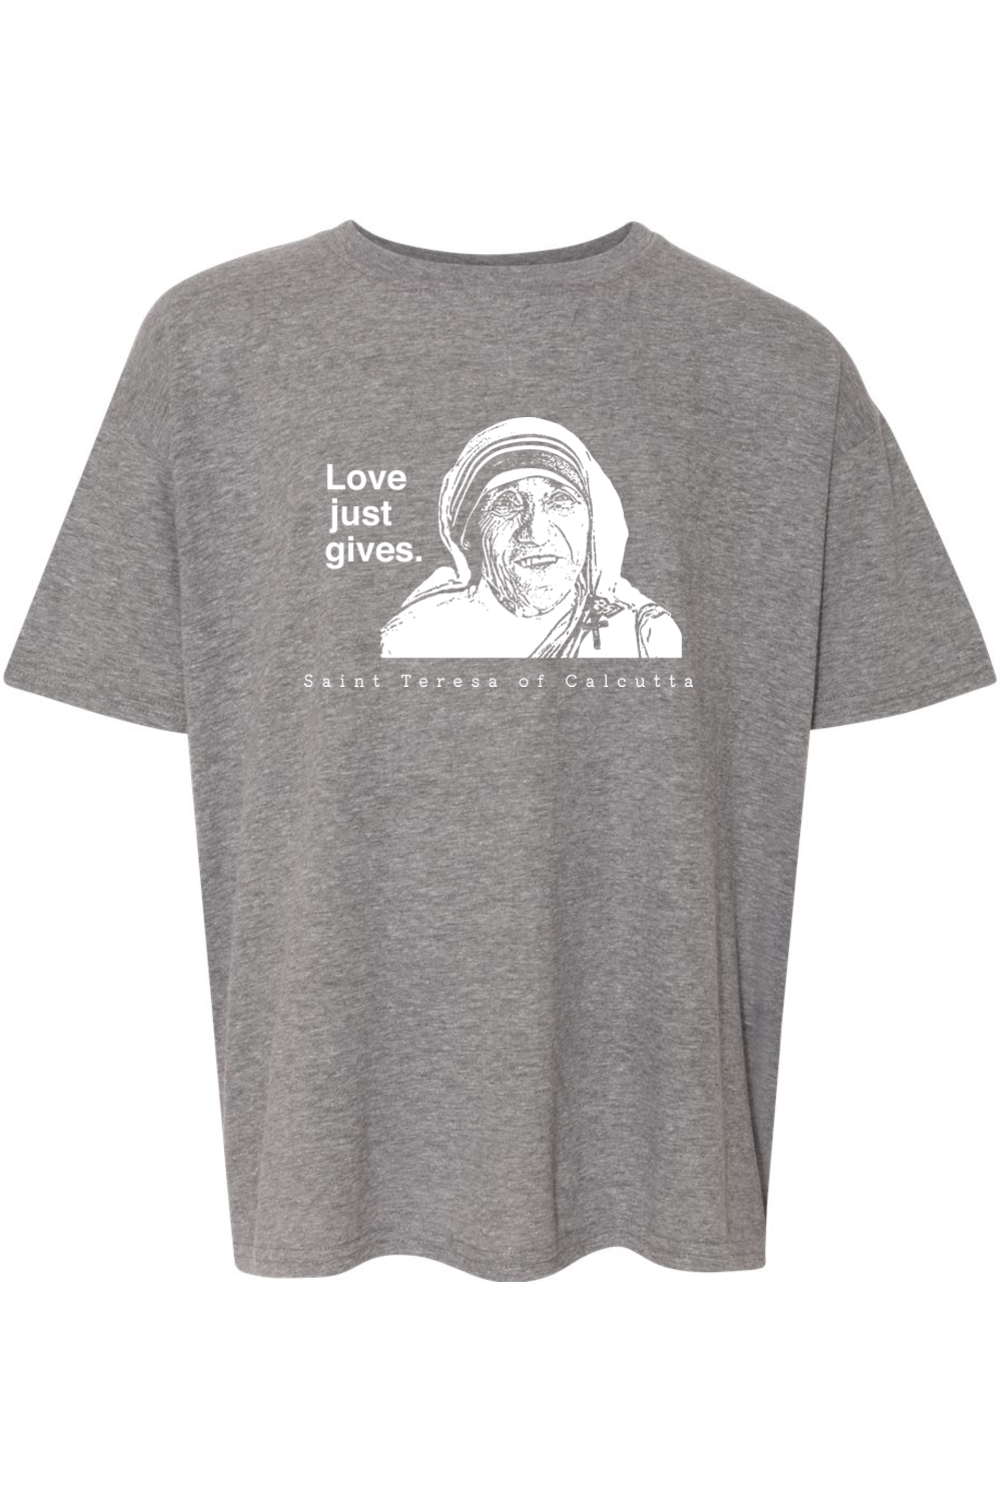 Love Just Gives - St. Teresa of Calcutta Youth T-Shirt